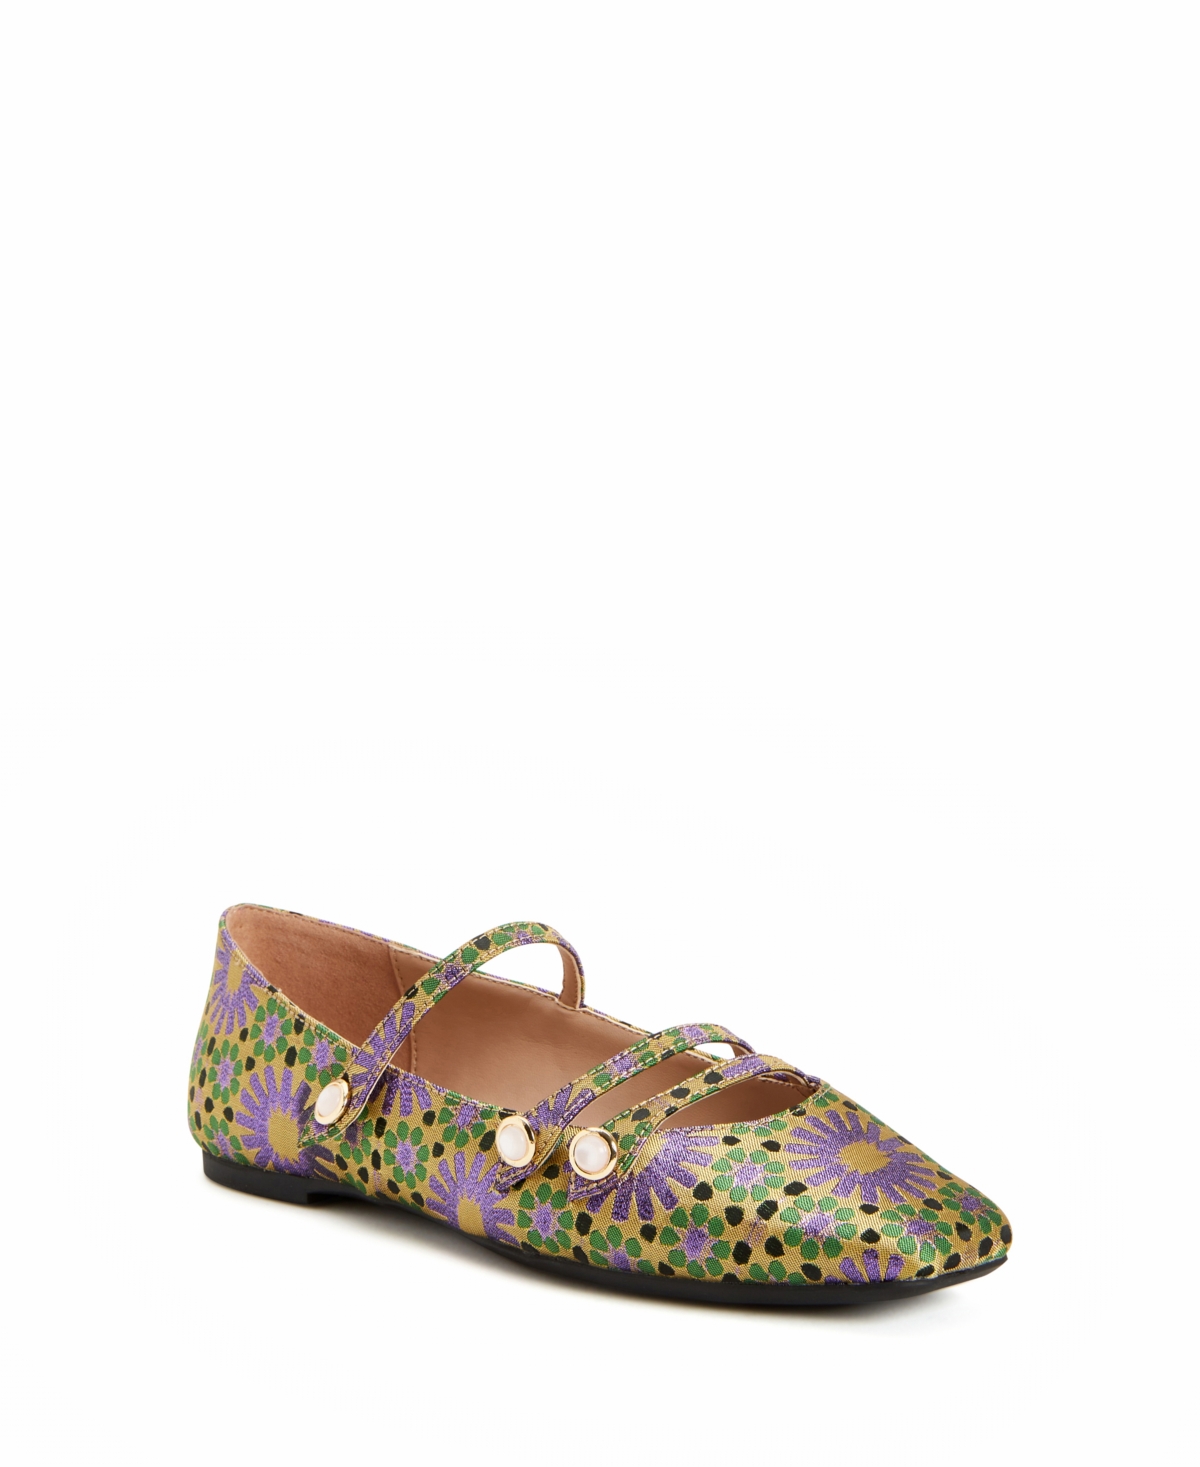 Katy Perry Women's The Evie Button Mary Jane Flats Women's Shoes